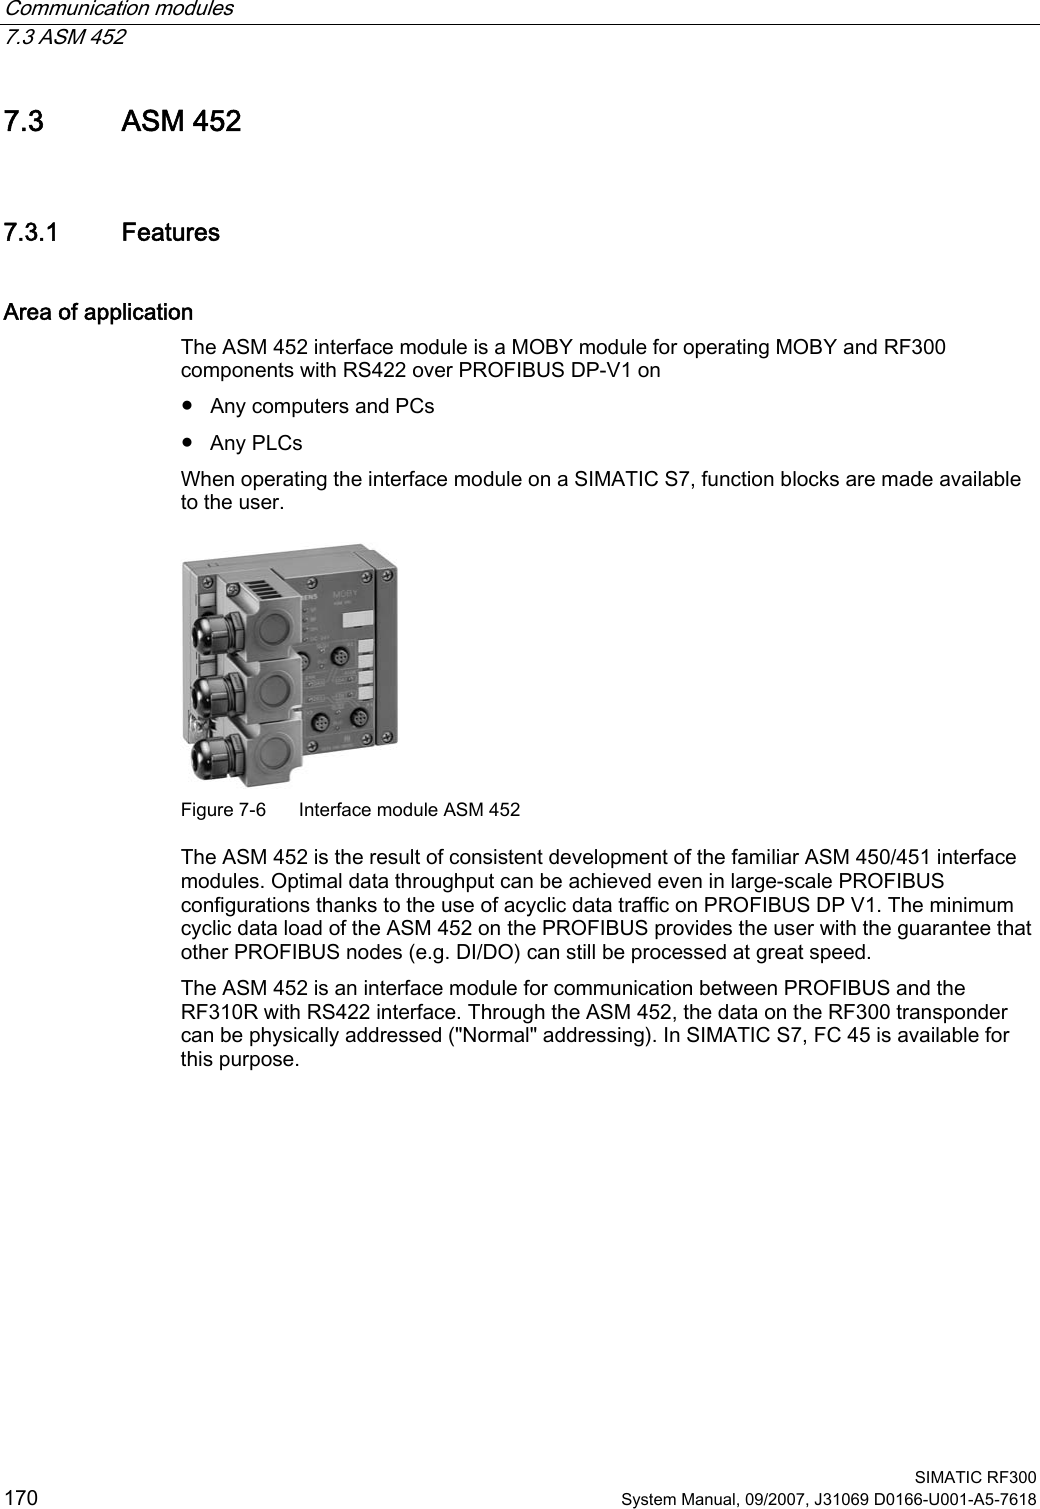 Communication modules   7.3 ASM 452  SIMATIC RF300 170 System Manual, 09/2007, J31069 D0166-U001-A5-7618 7.3 ASM 452 7.3.1 Features Area of application The ASM 452 interface module is a MOBY module for operating MOBY and RF300 components with RS422 over PROFIBUS DP-V1 on ●  Any computers and PCs ●  Any PLCs When operating the interface module on a SIMATIC S7, function blocks are made available to the user.  Figure 7-6  Interface module ASM 452 The ASM 452 is the result of consistent development of the familiar ASM 450/451 interface modules. Optimal data throughput can be achieved even in large-scale PROFIBUS configurations thanks to the use of acyclic data traffic on PROFIBUS DP V1. The minimum cyclic data load of the ASM 452 on the PROFIBUS provides the user with the guarantee that other PROFIBUS nodes (e.g. DI/DO) can still be processed at great speed. The ASM 452 is an interface module for communication between PROFIBUS and the RF310R with RS422 interface. Through the ASM 452, the data on the RF300 transponder can be physically addressed (&quot;Normal&quot; addressing). In SIMATIC S7, FC 45 is available for this purpose. 